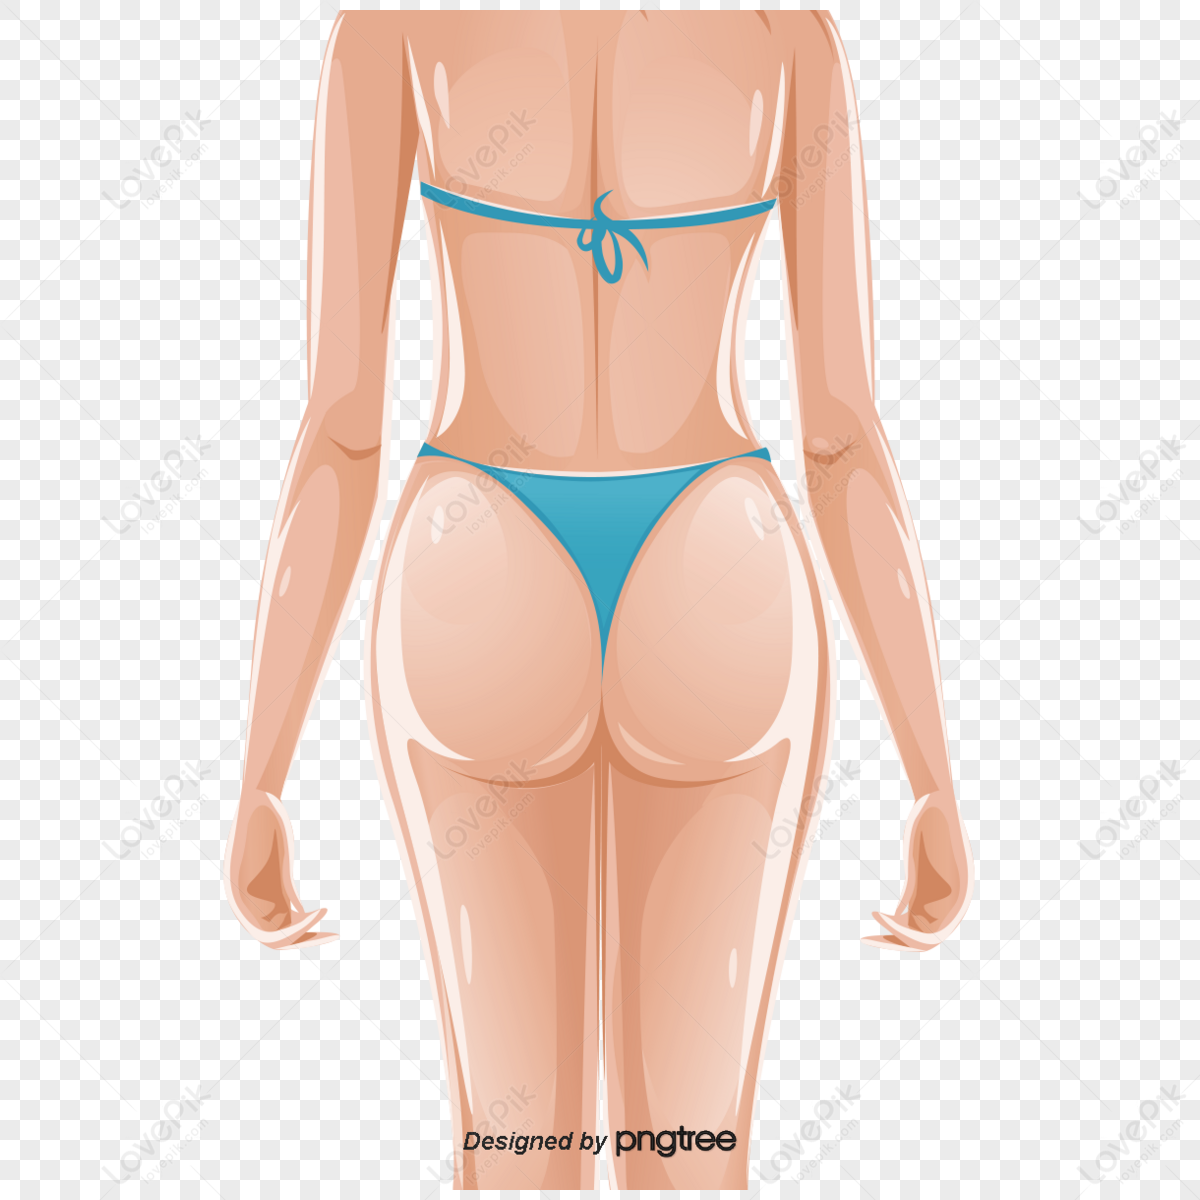 Cartoon Sexy Female Buttocks In A Thong Royalty Free SVG, Cliparts